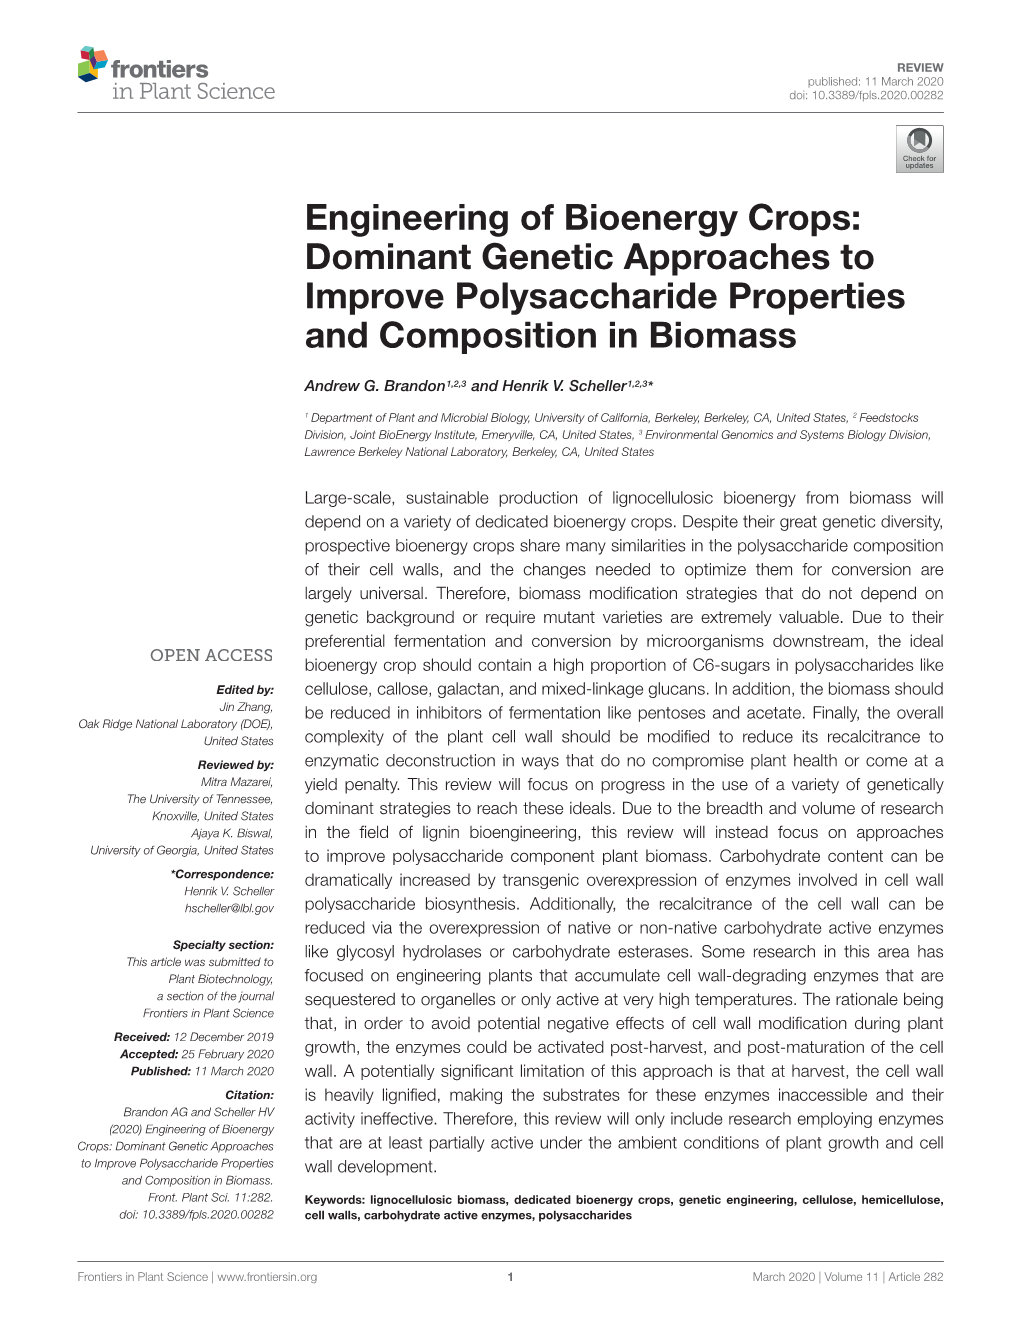 Engineering of Bioenergy Crops: Dominant Genetic Approaches to Improve Polysaccharide Properties and Composition in Biomass